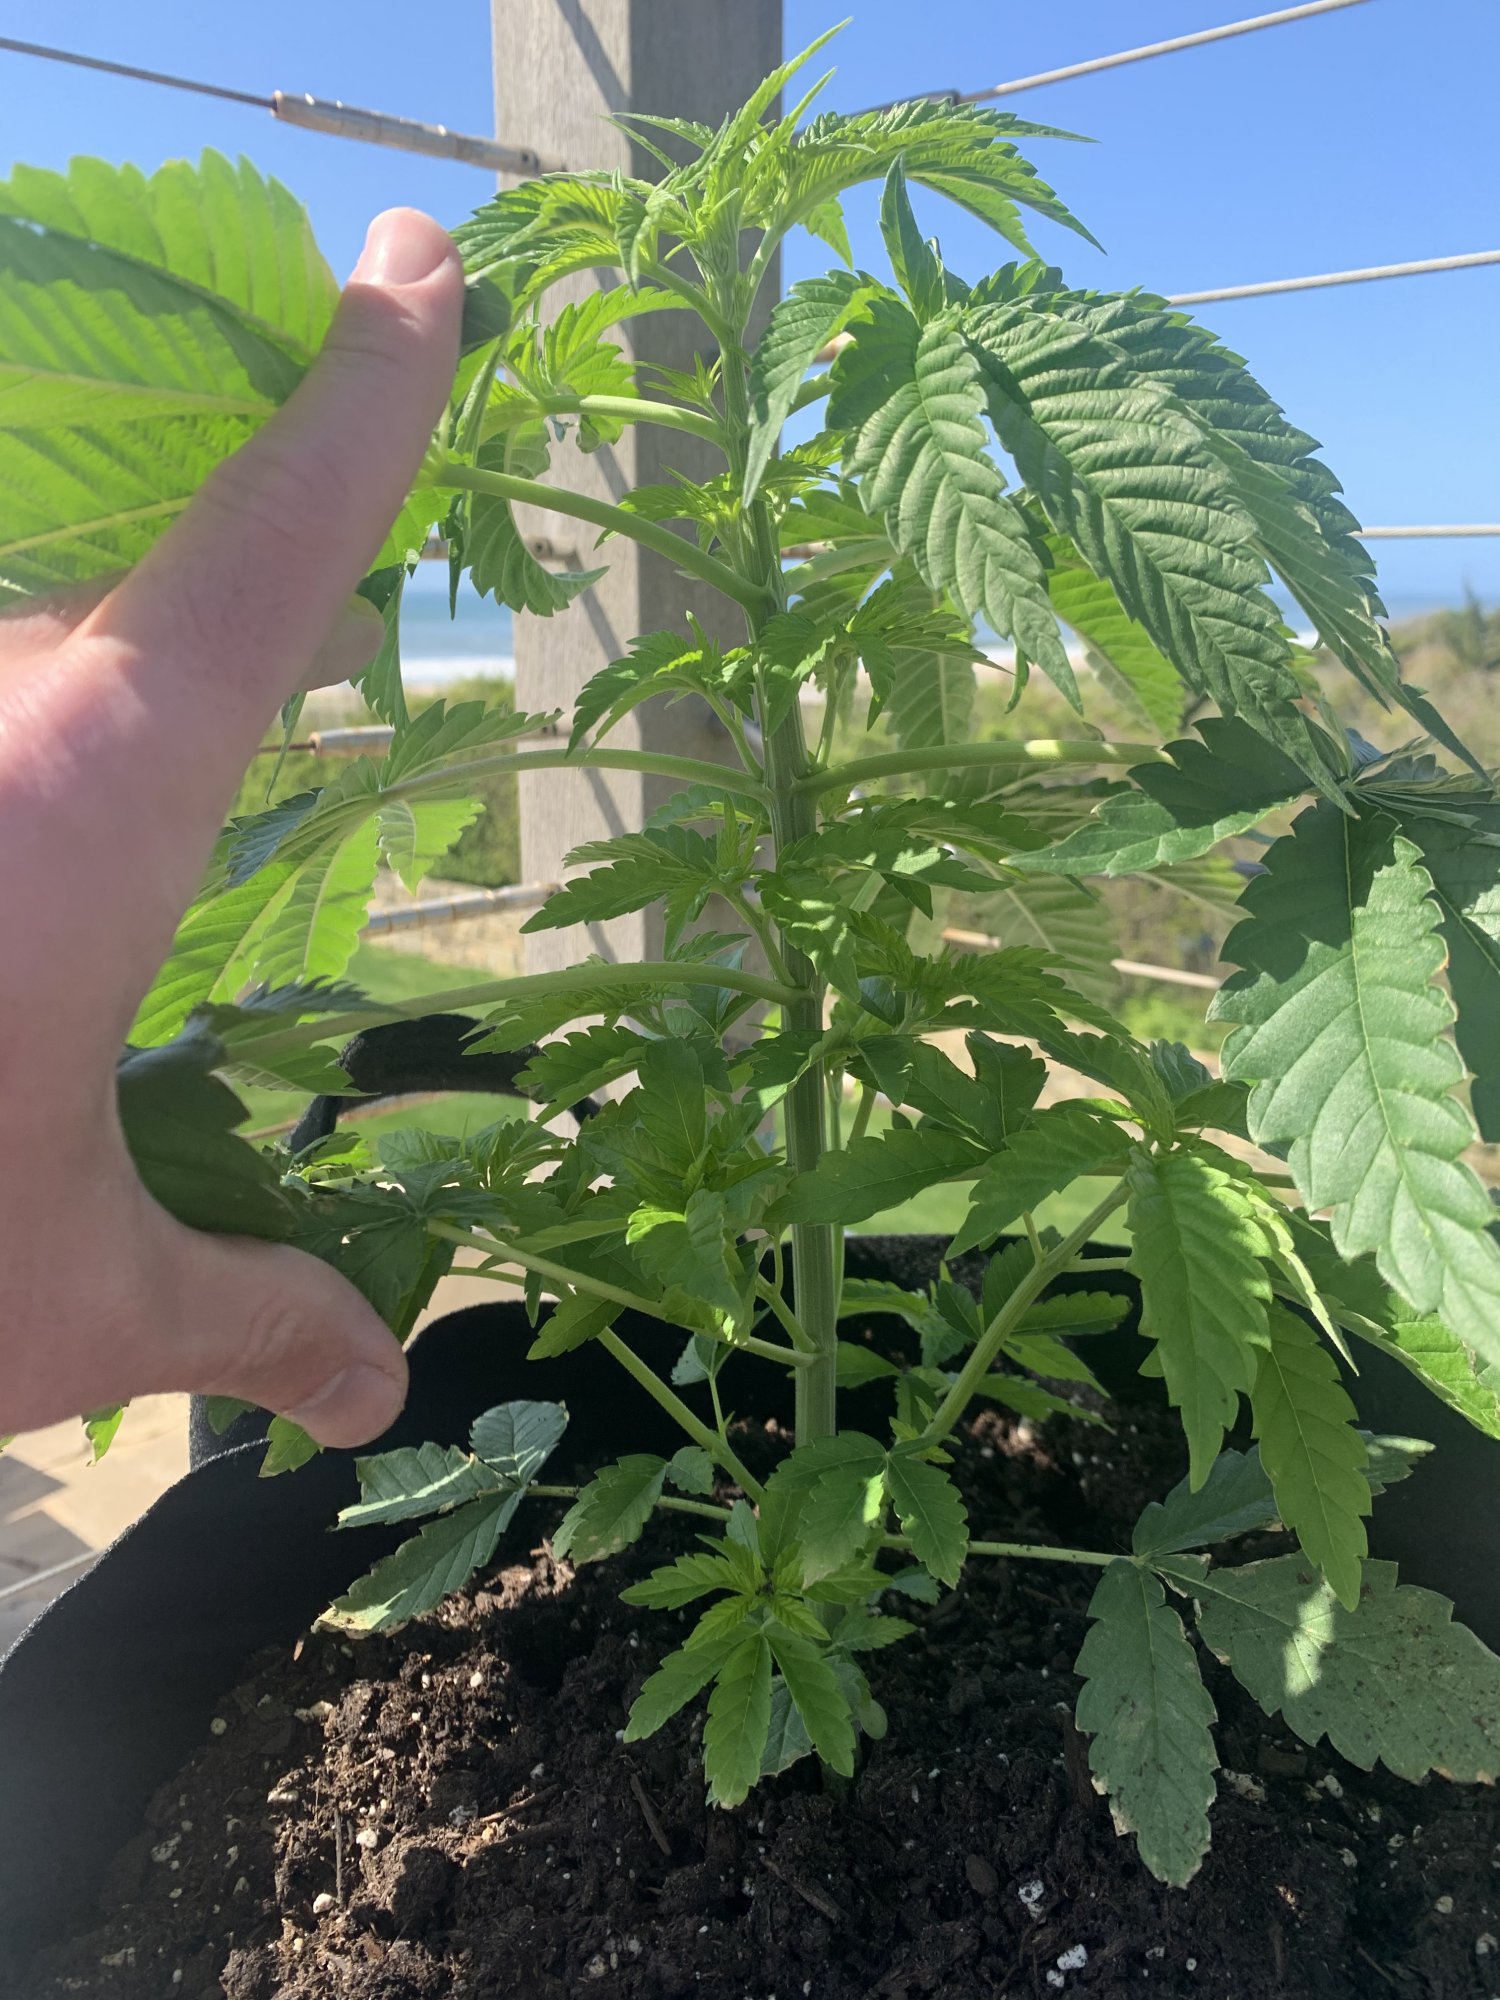 Another first time grower looking for sage advice